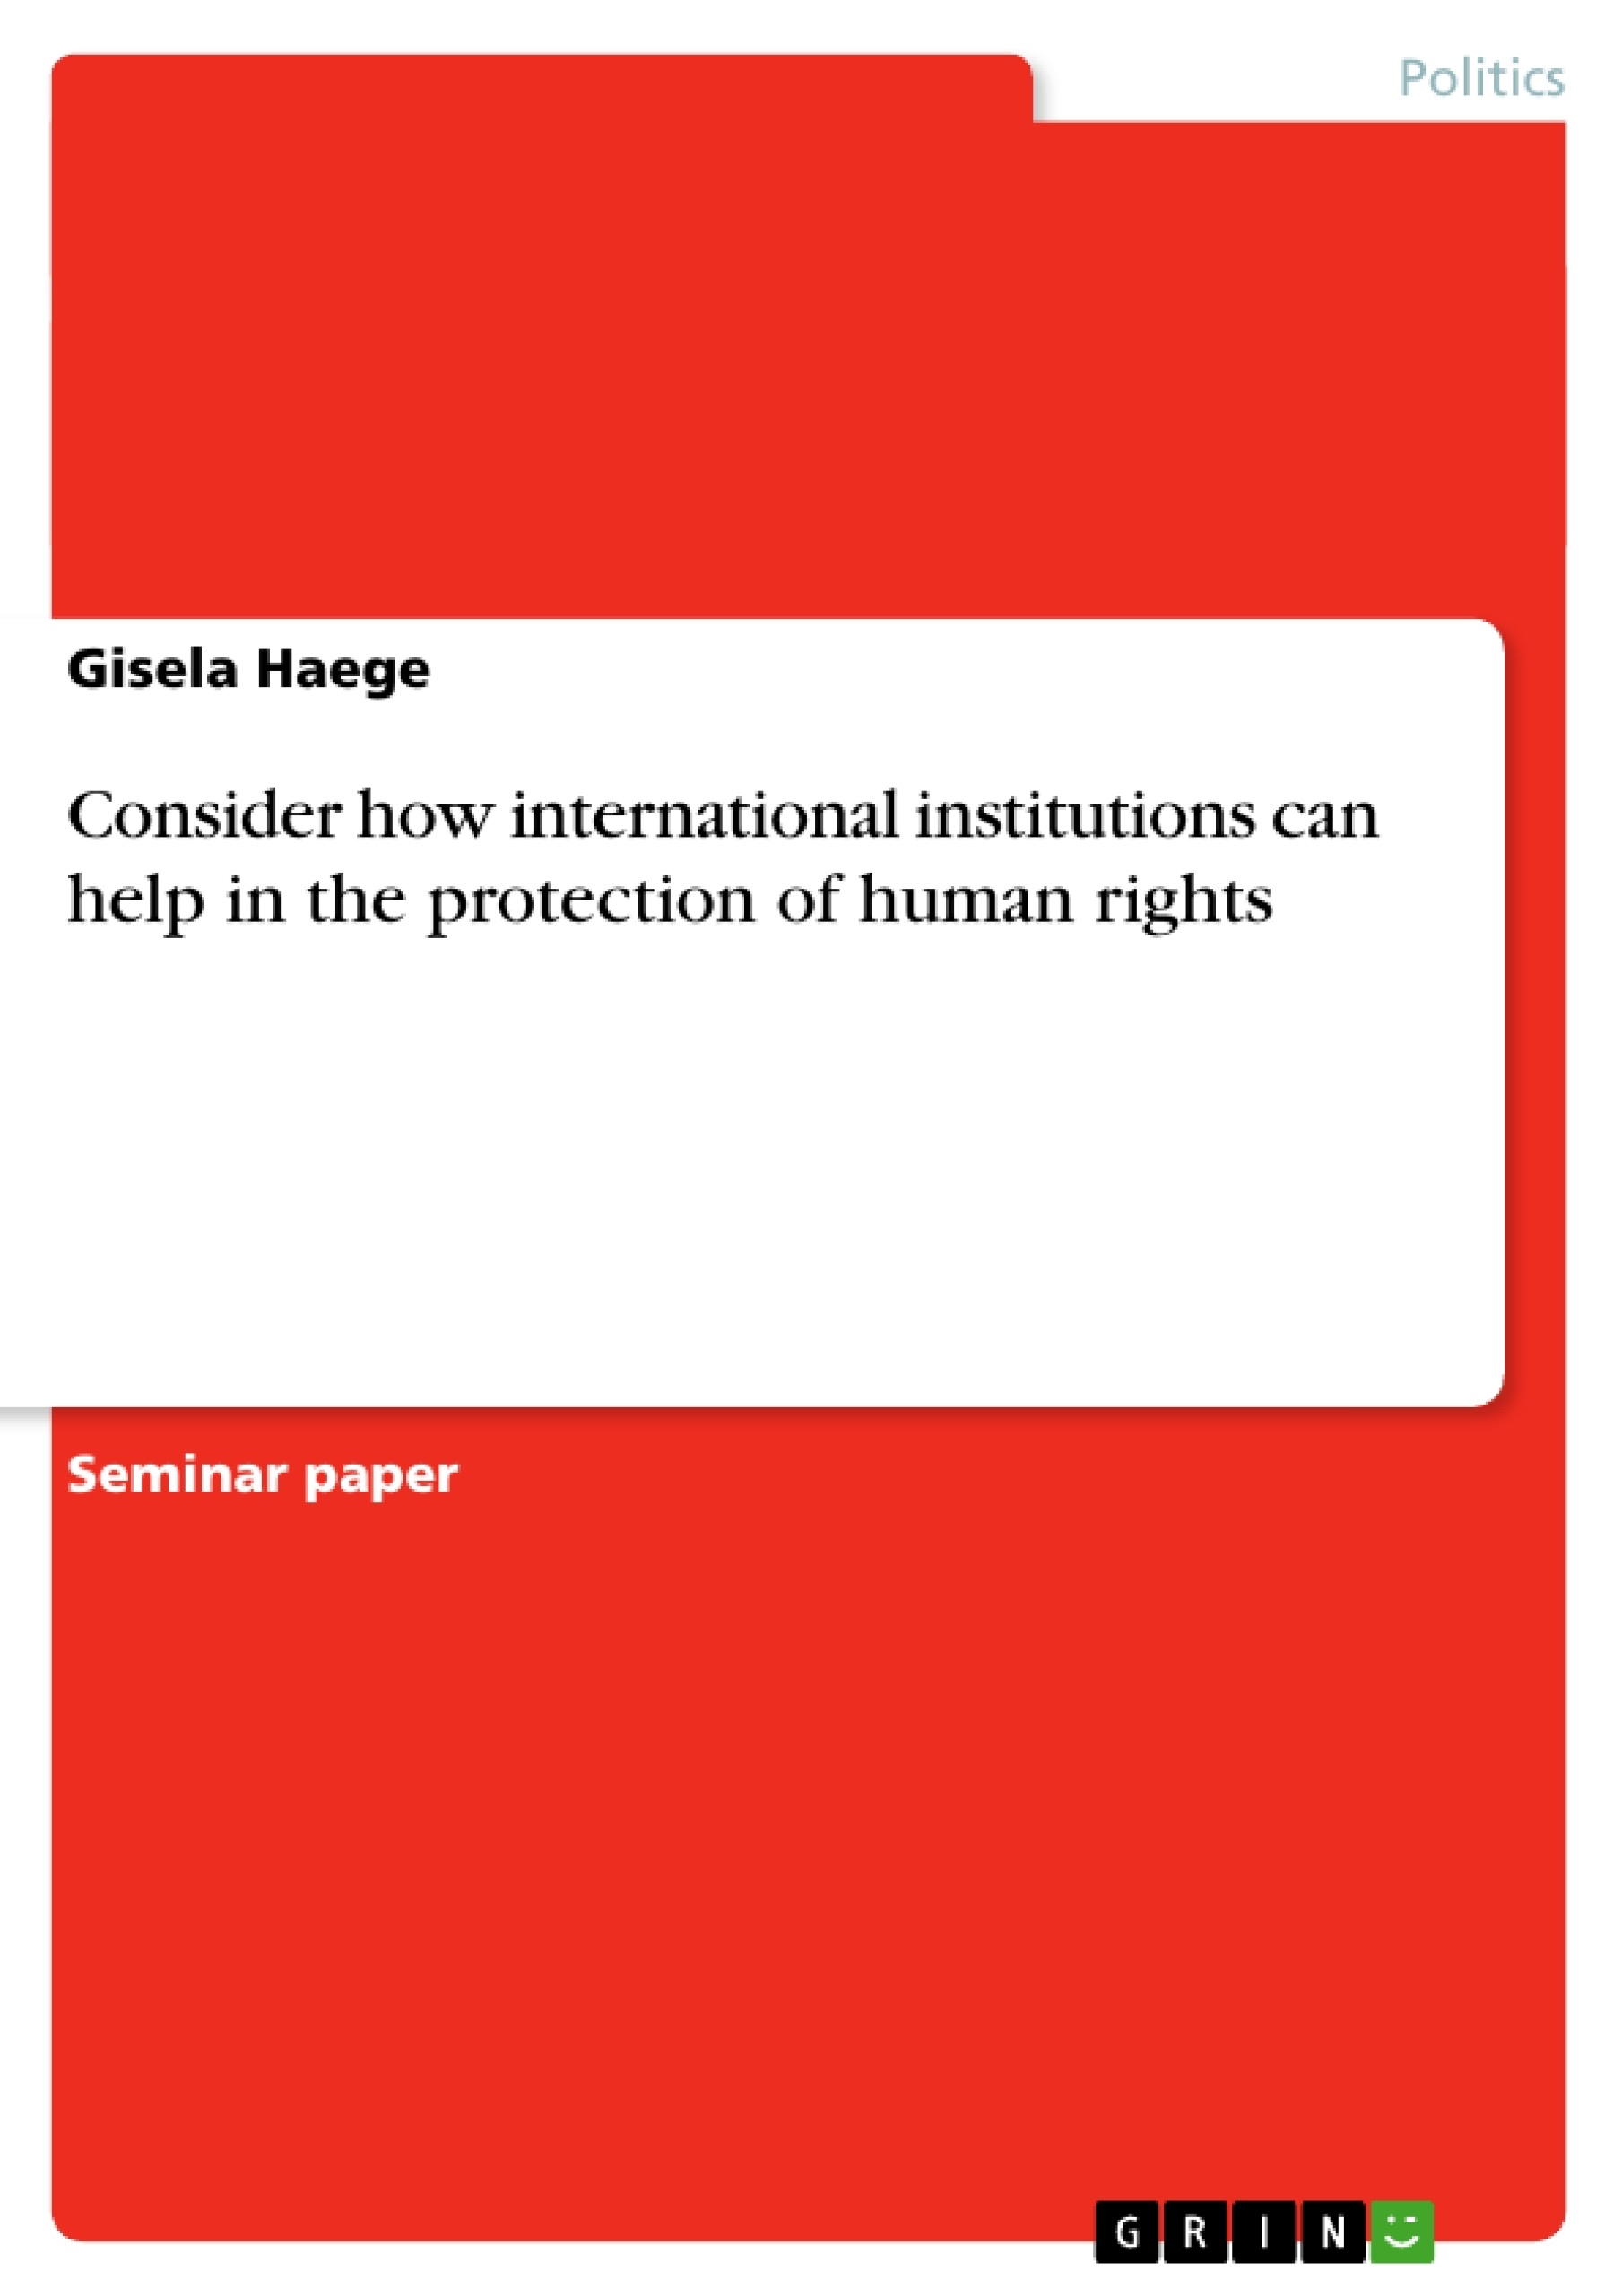 Título: Consider how international institutions can help in the protection of human rights